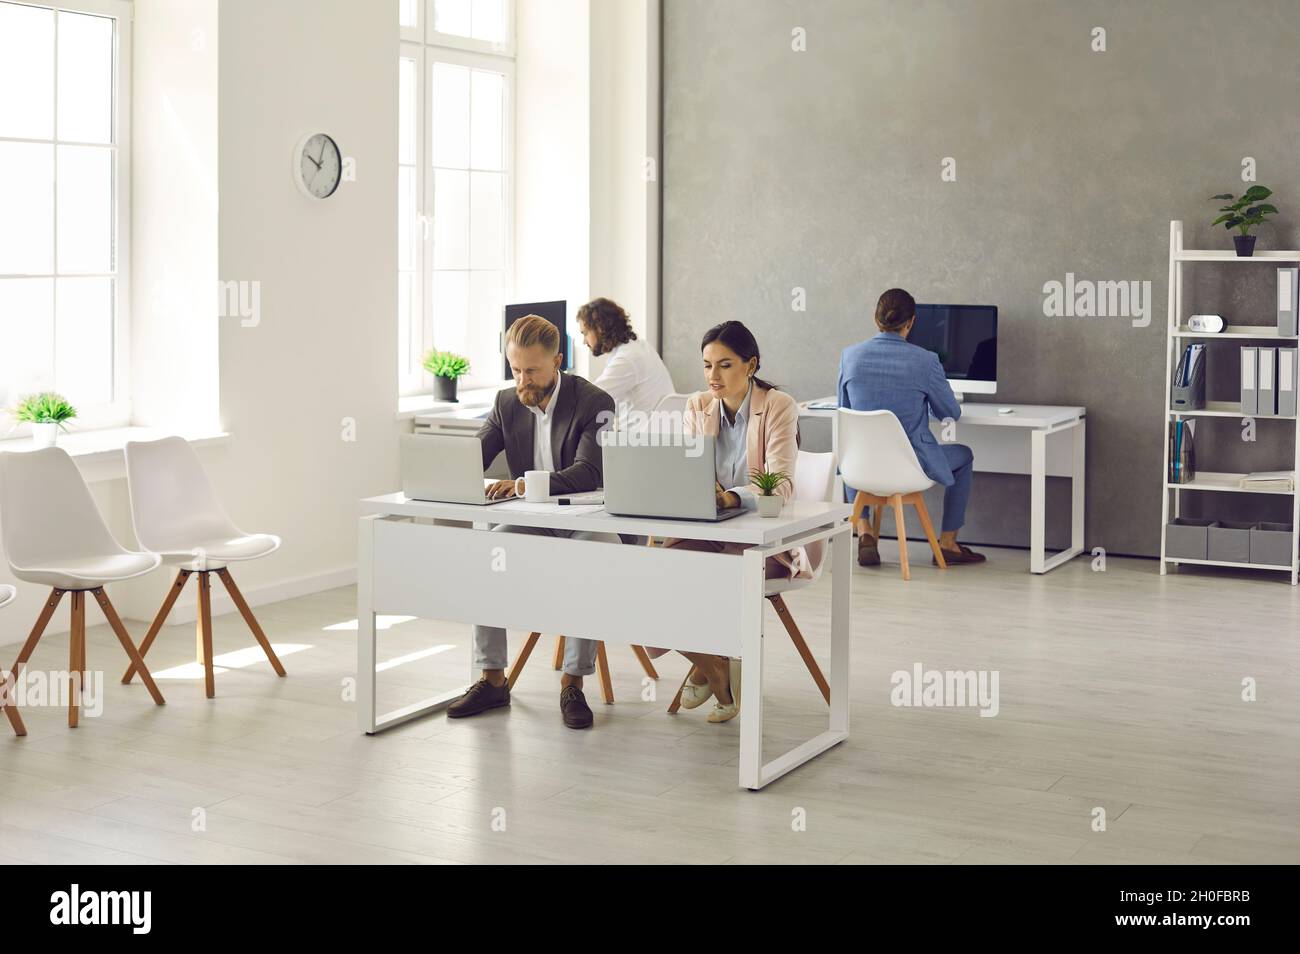 Modern interior of company's workplace with employees sitting at tables with laptops. Stock Photo